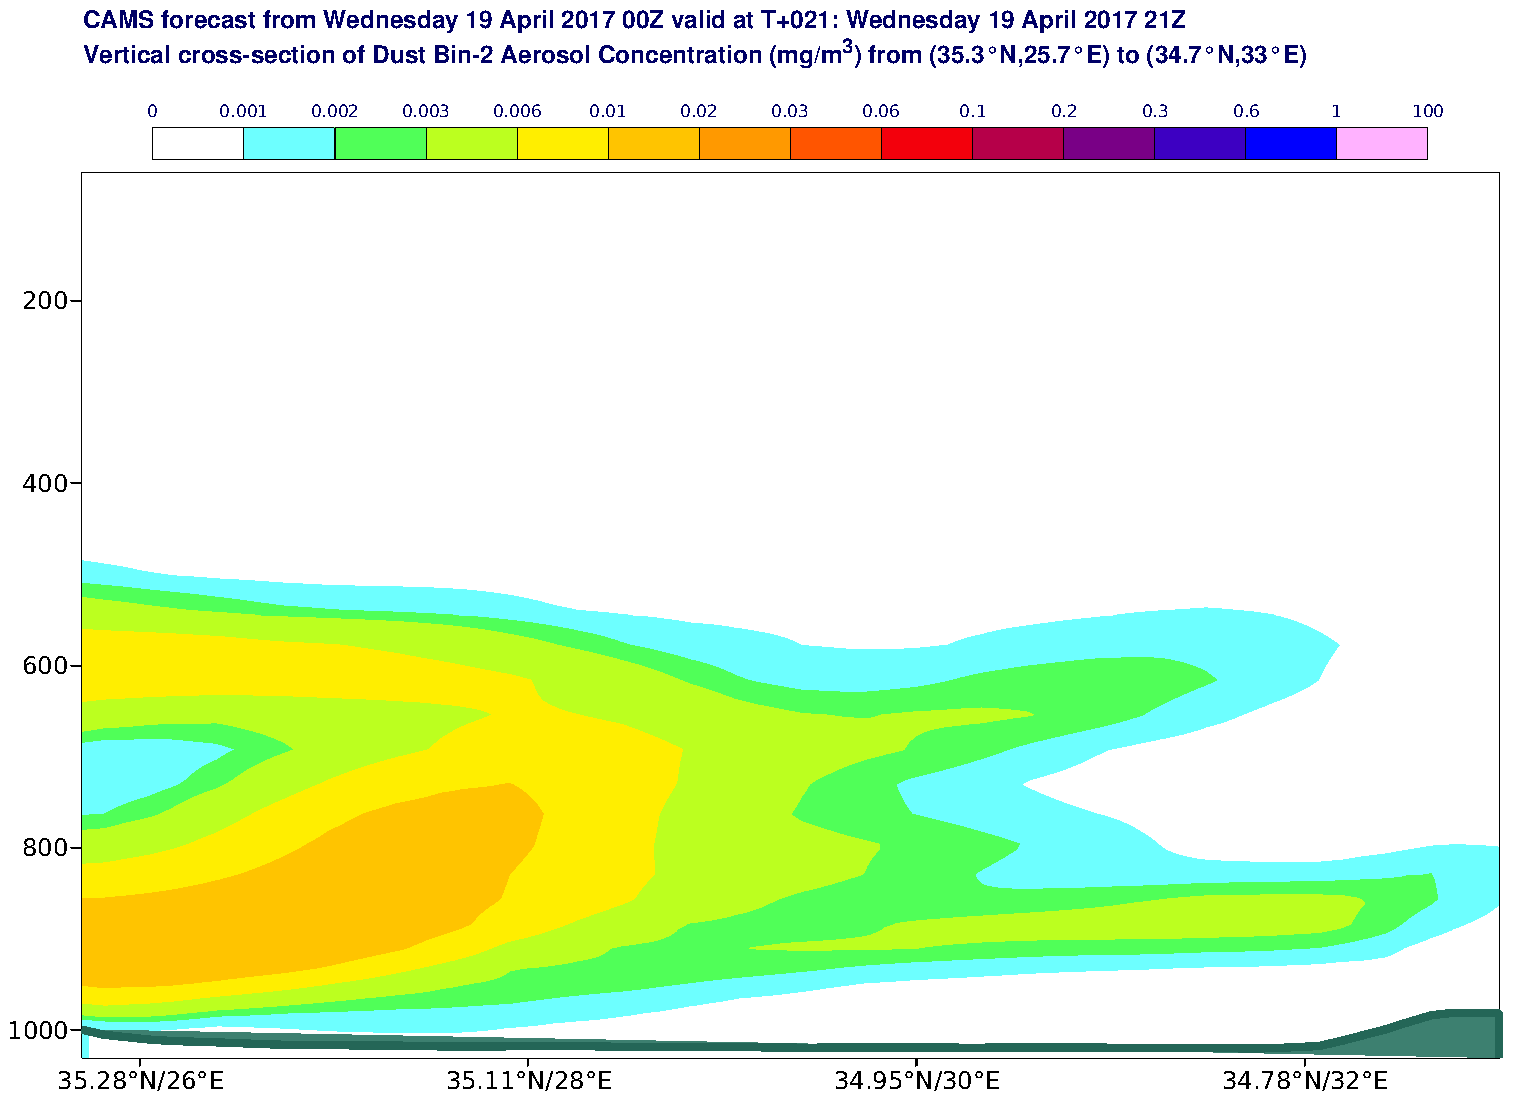 Vertical cross-section of Dust Bin-2 Aerosol Concentration (mg/m3) valid at T21 - 2017-04-19 21:00